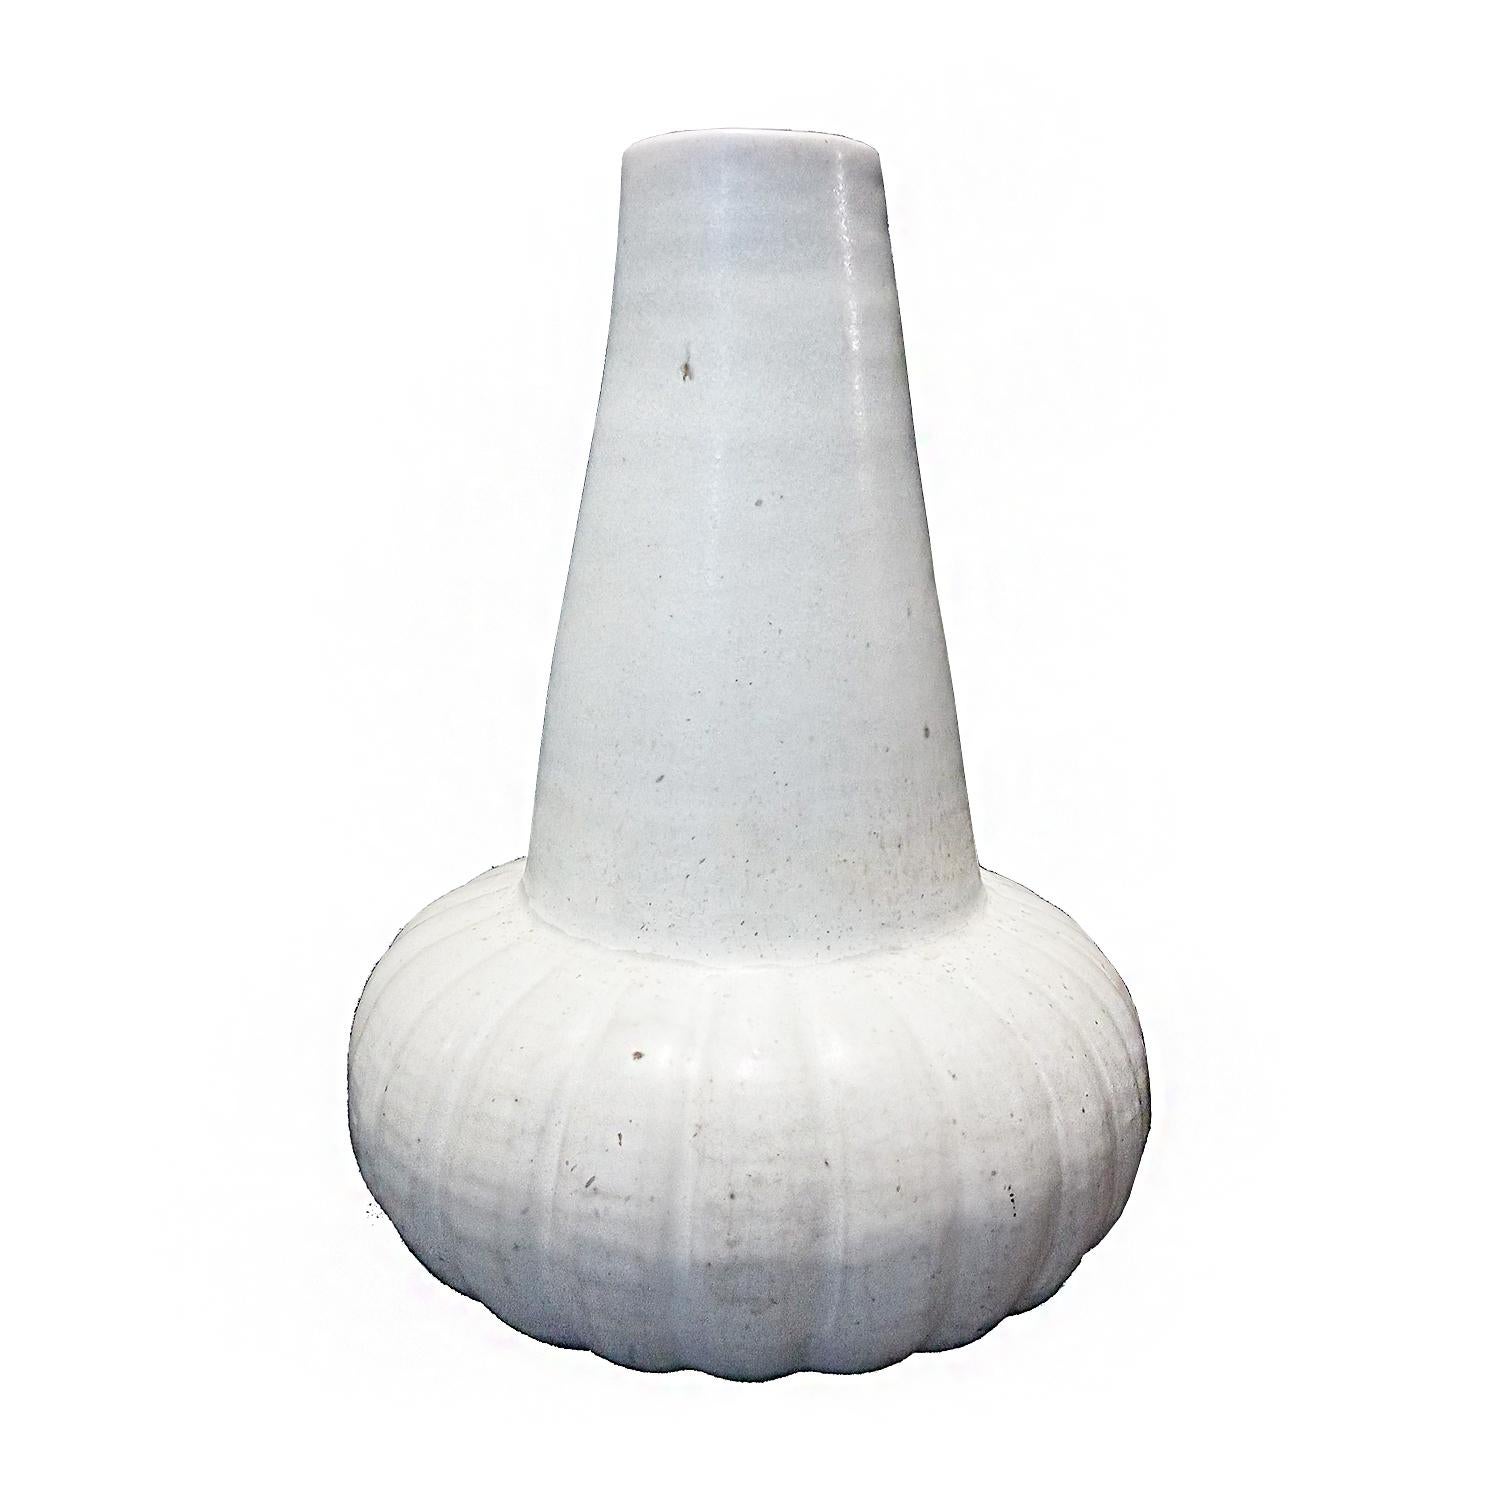 Other Thai Ceramic Vase with White Glaze, Contemporary For Sale